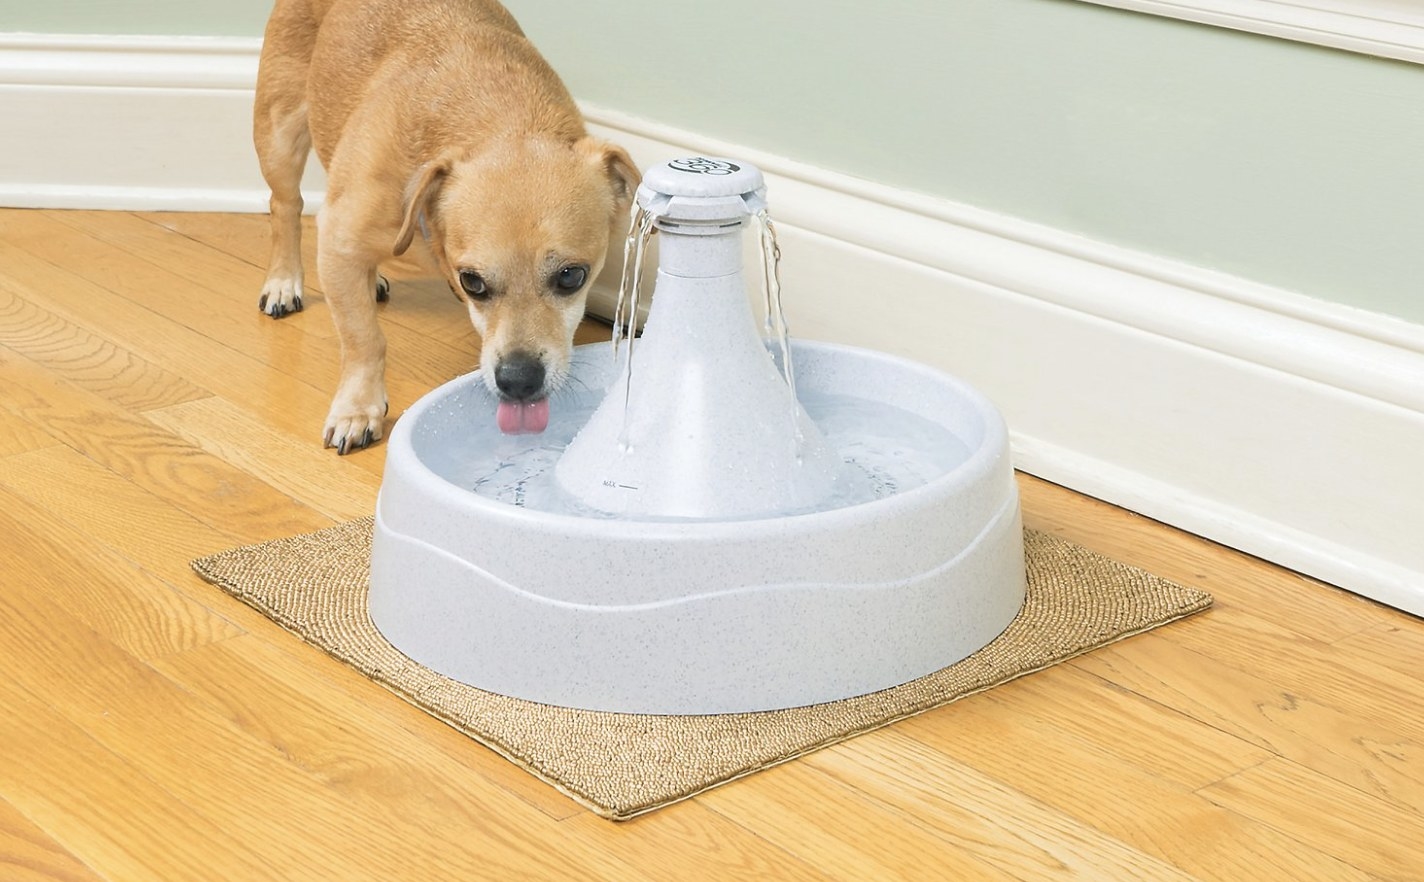 A dog is drinking water from a white pet fountain